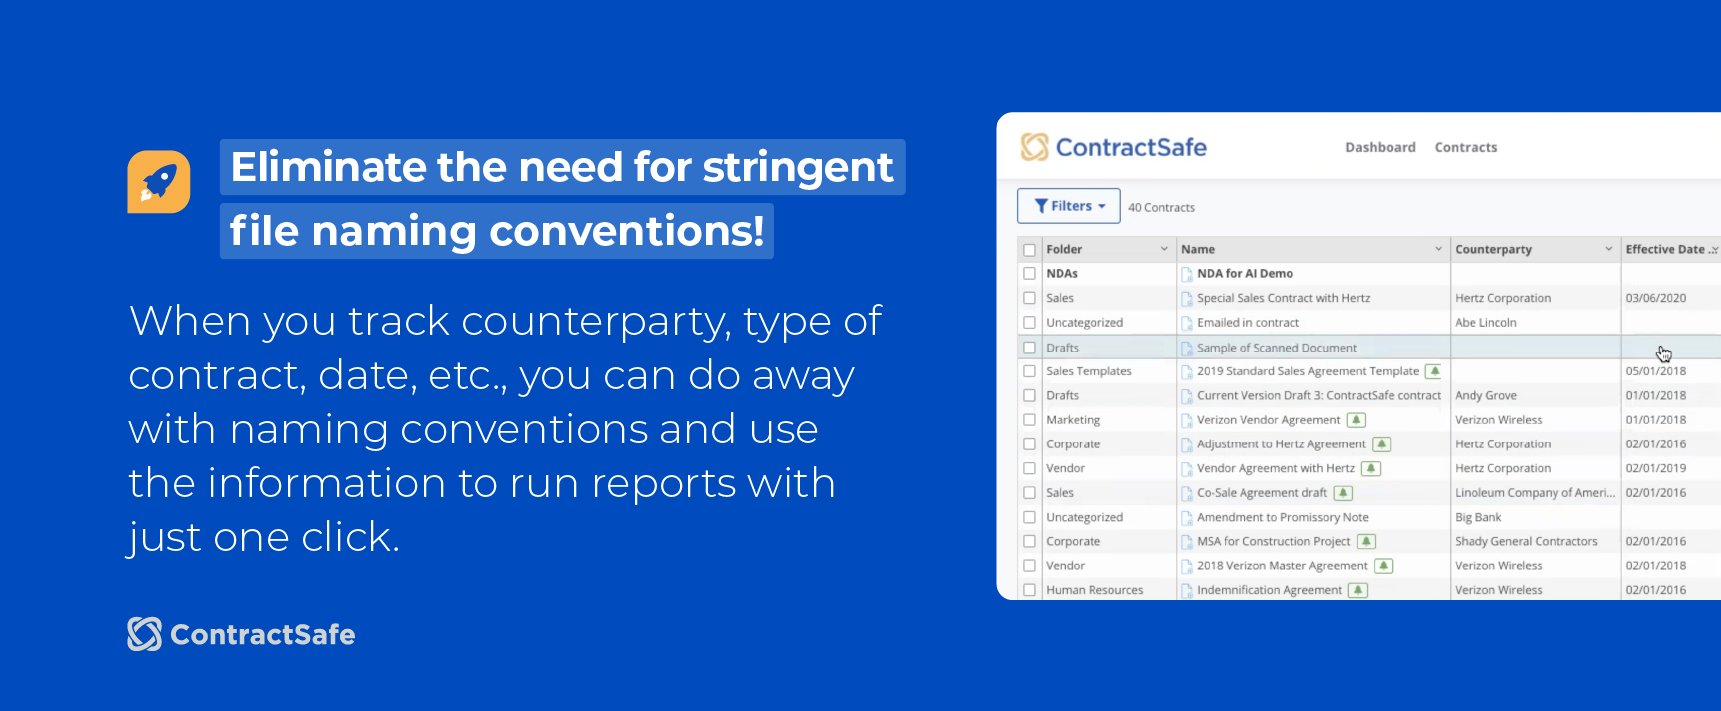 Eliminate the need for stringent file naming conventions! When you track counterparts, type of contract, data, etc., you can do away with naming conventions and use the information to run reports with just one click.